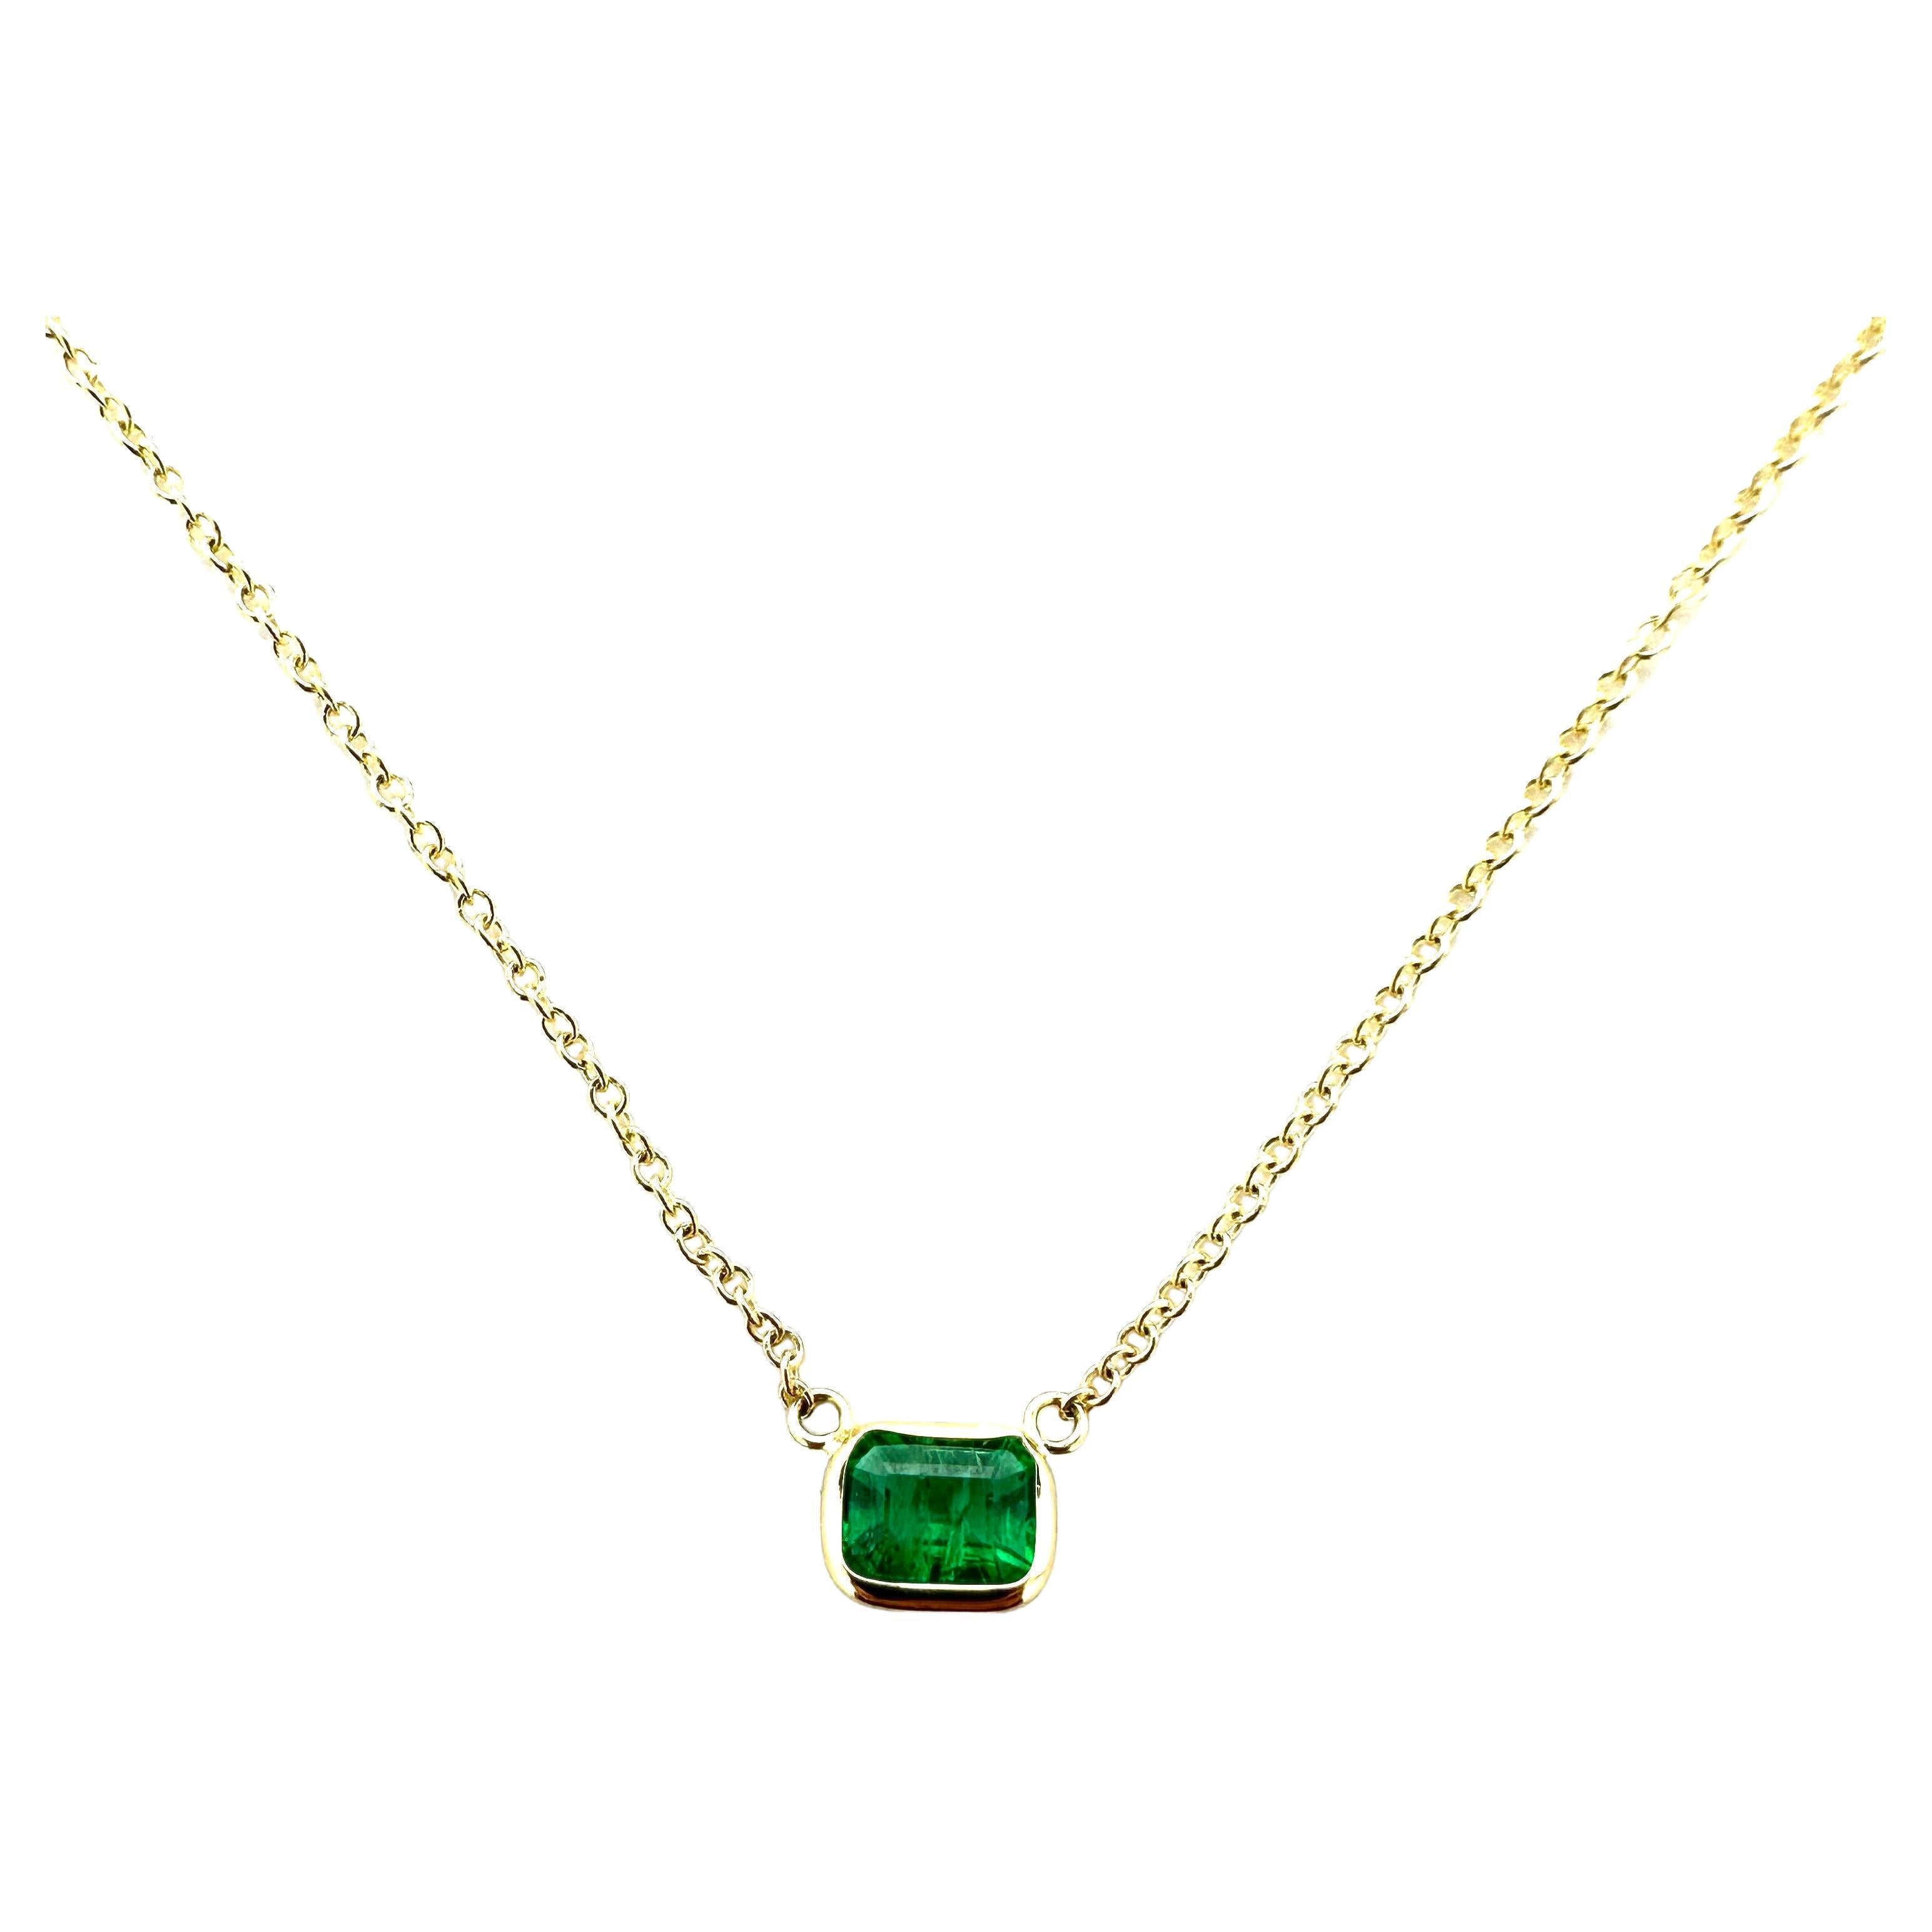 0.71 Carat Emerald Cut & Fashion Necklaces In 14K Yellow Gold For Sale